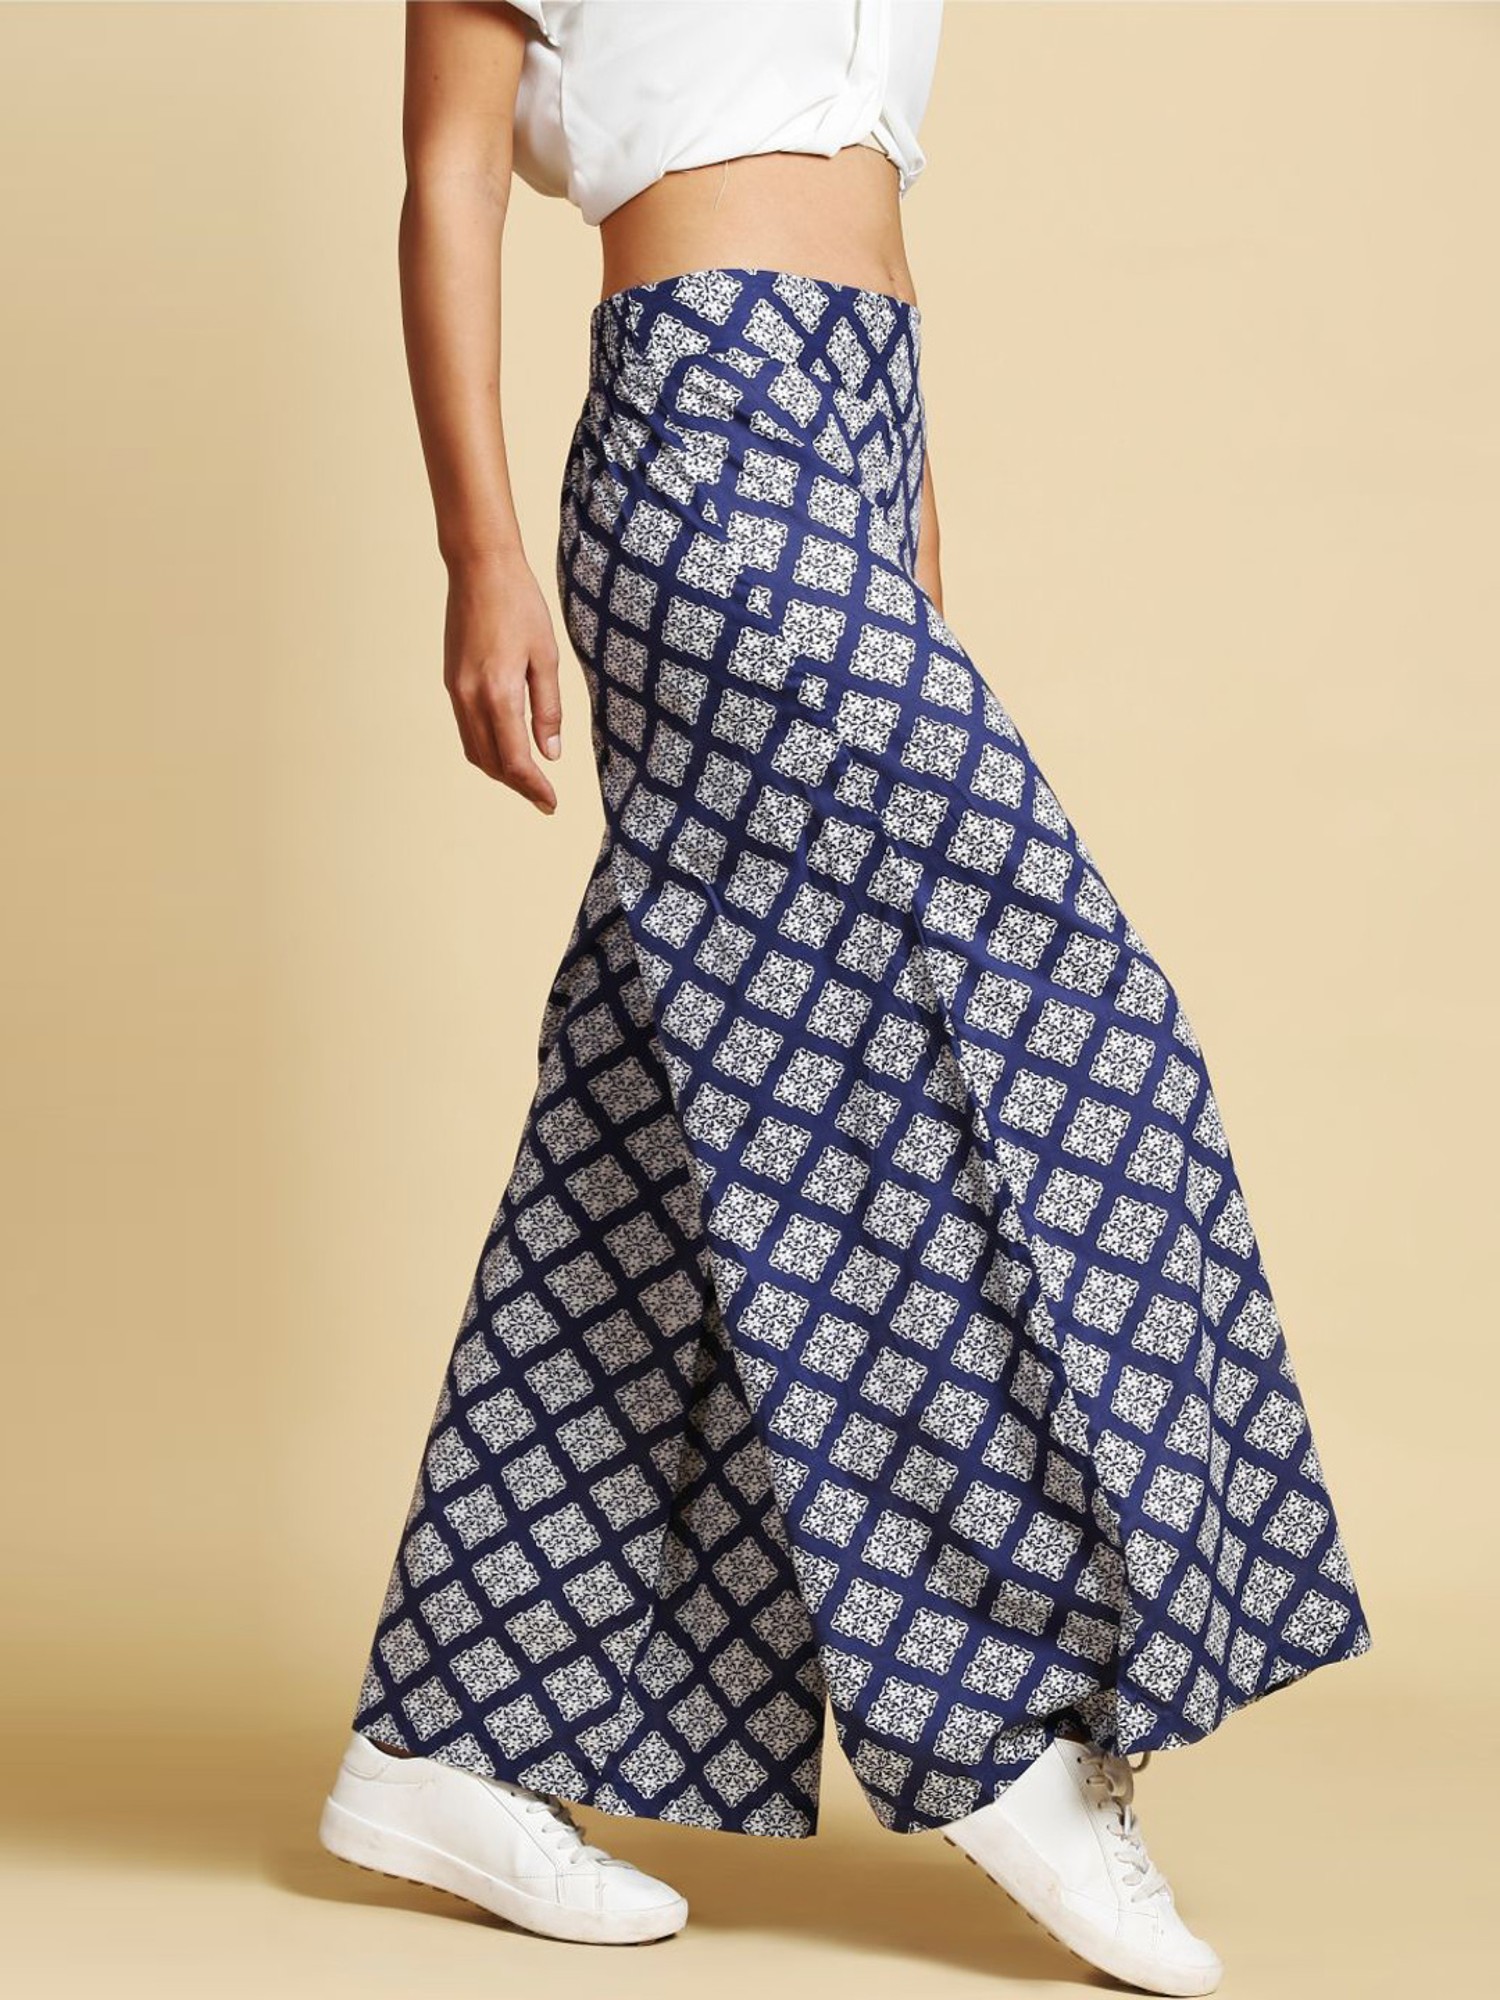 Buy Ankle Length Palazzo  Ankle Length Palazzo Pants  Apella